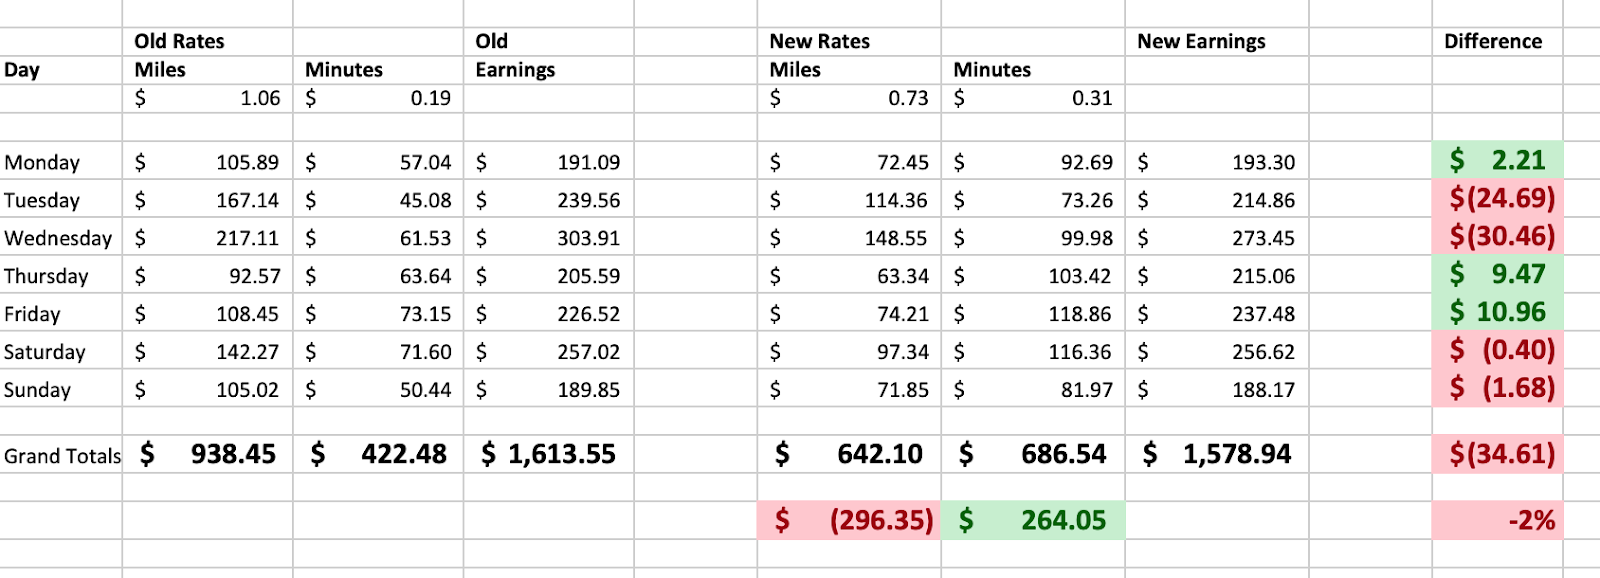 image of Old Lyft Driver Rates vs. New Lyft Driver Rates